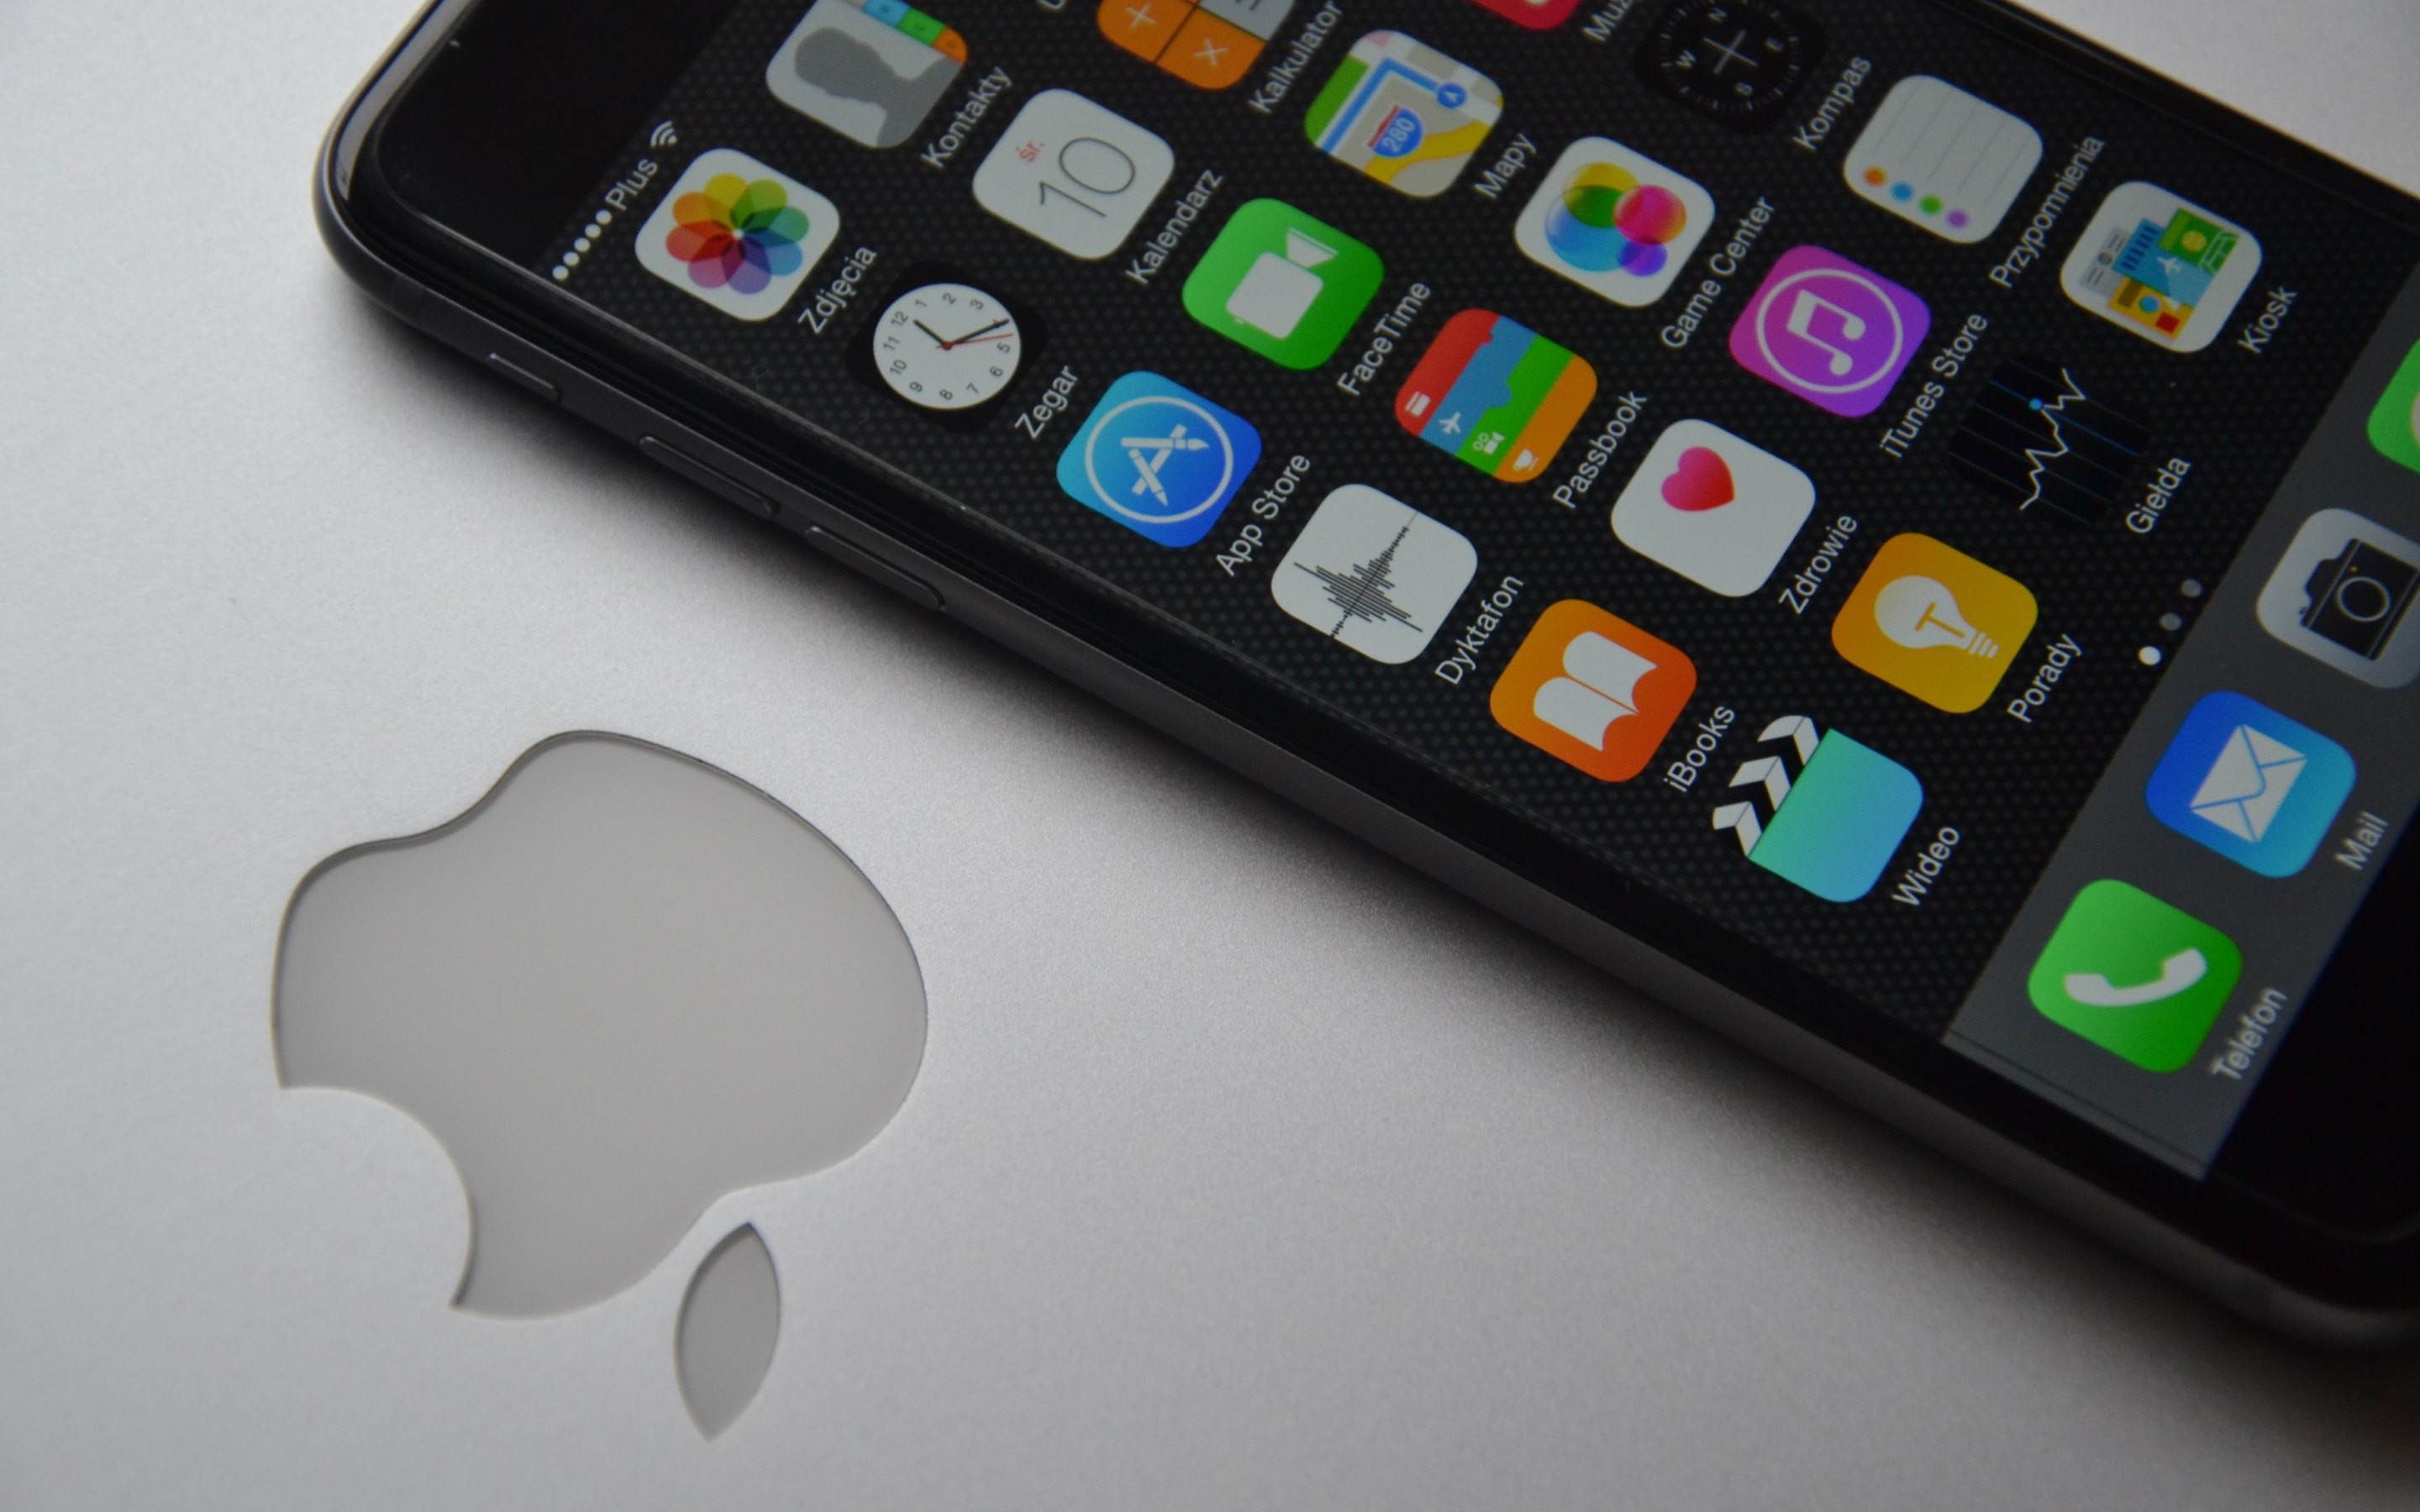 2880x1800 Wallpaper Weekends: iPhone 6 and 6 Plus Wallpapers for Your Mac (Wait,  What?)